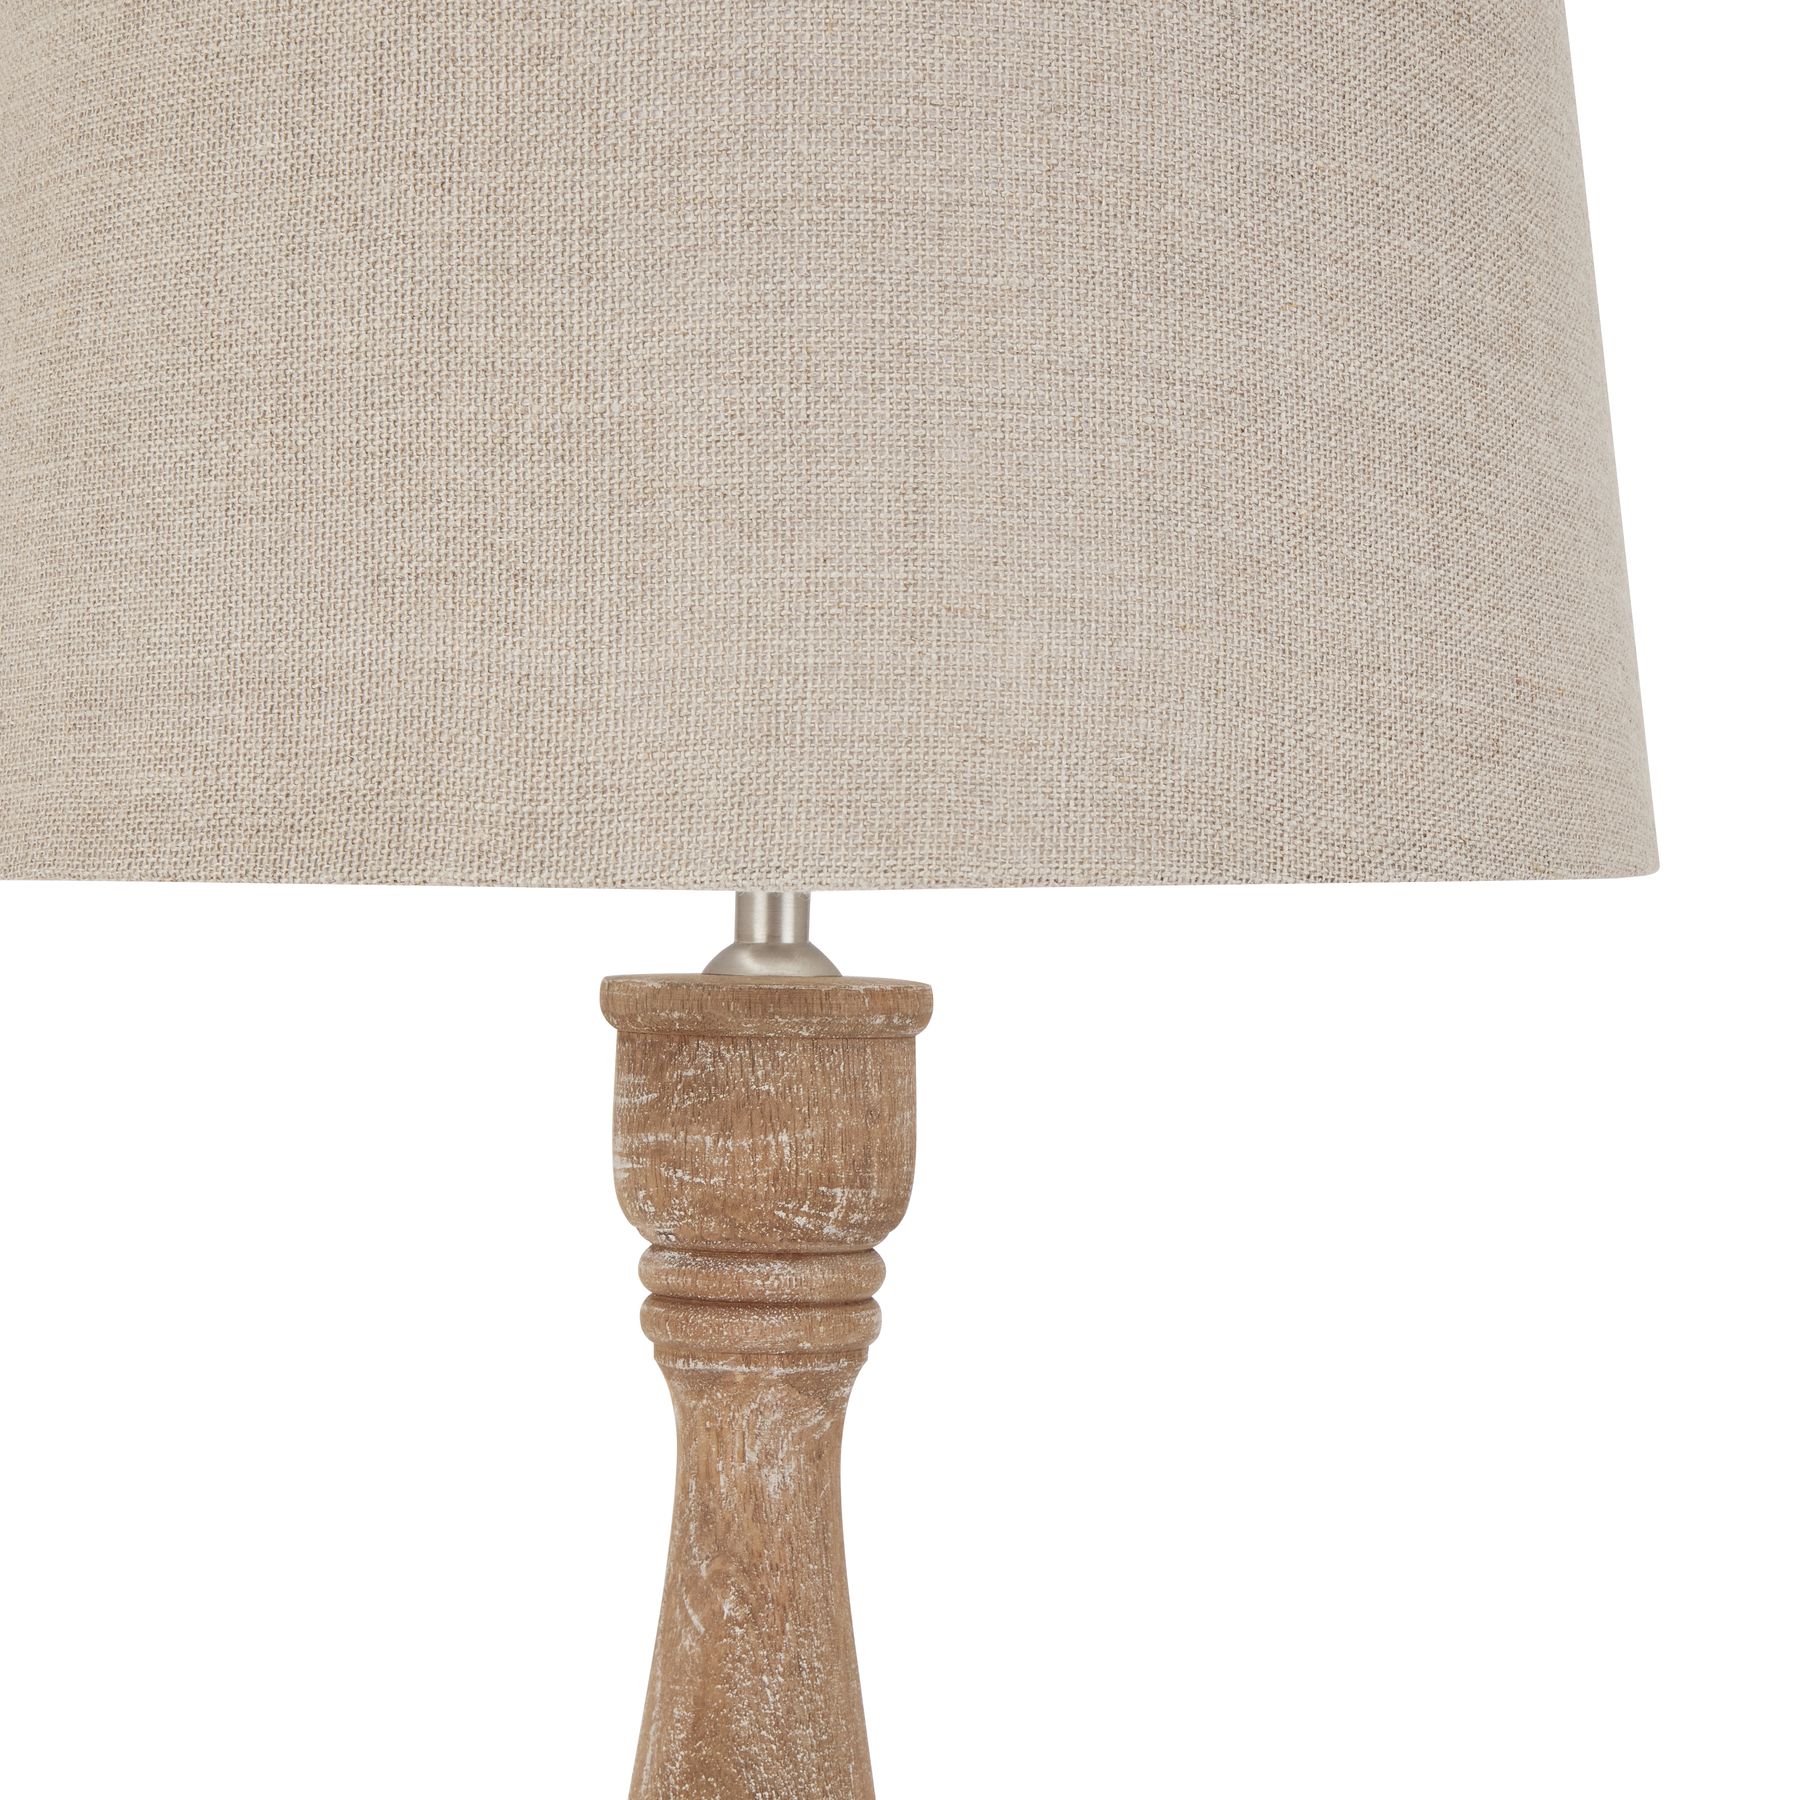 Delaney Natural Wash Candlestick Lamp With Linen Shade - Image 2